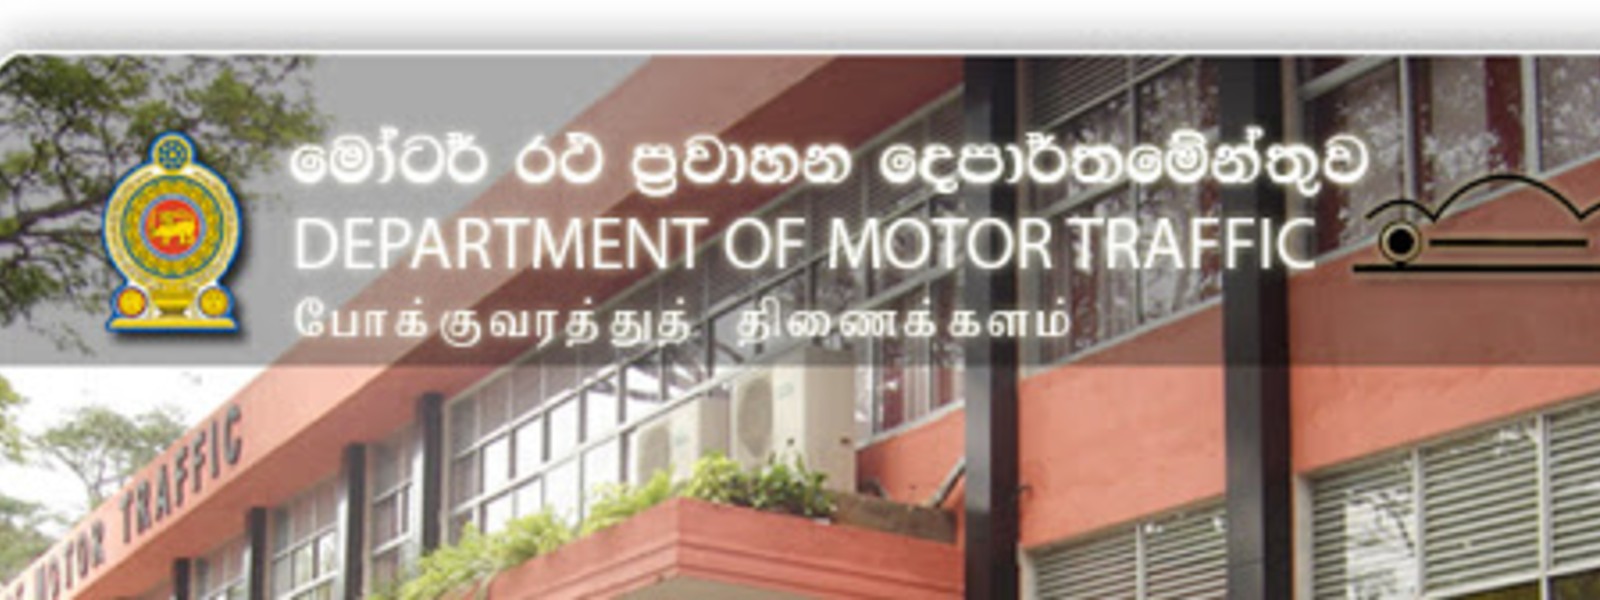 Motor traffic dept. to resume services on May 20